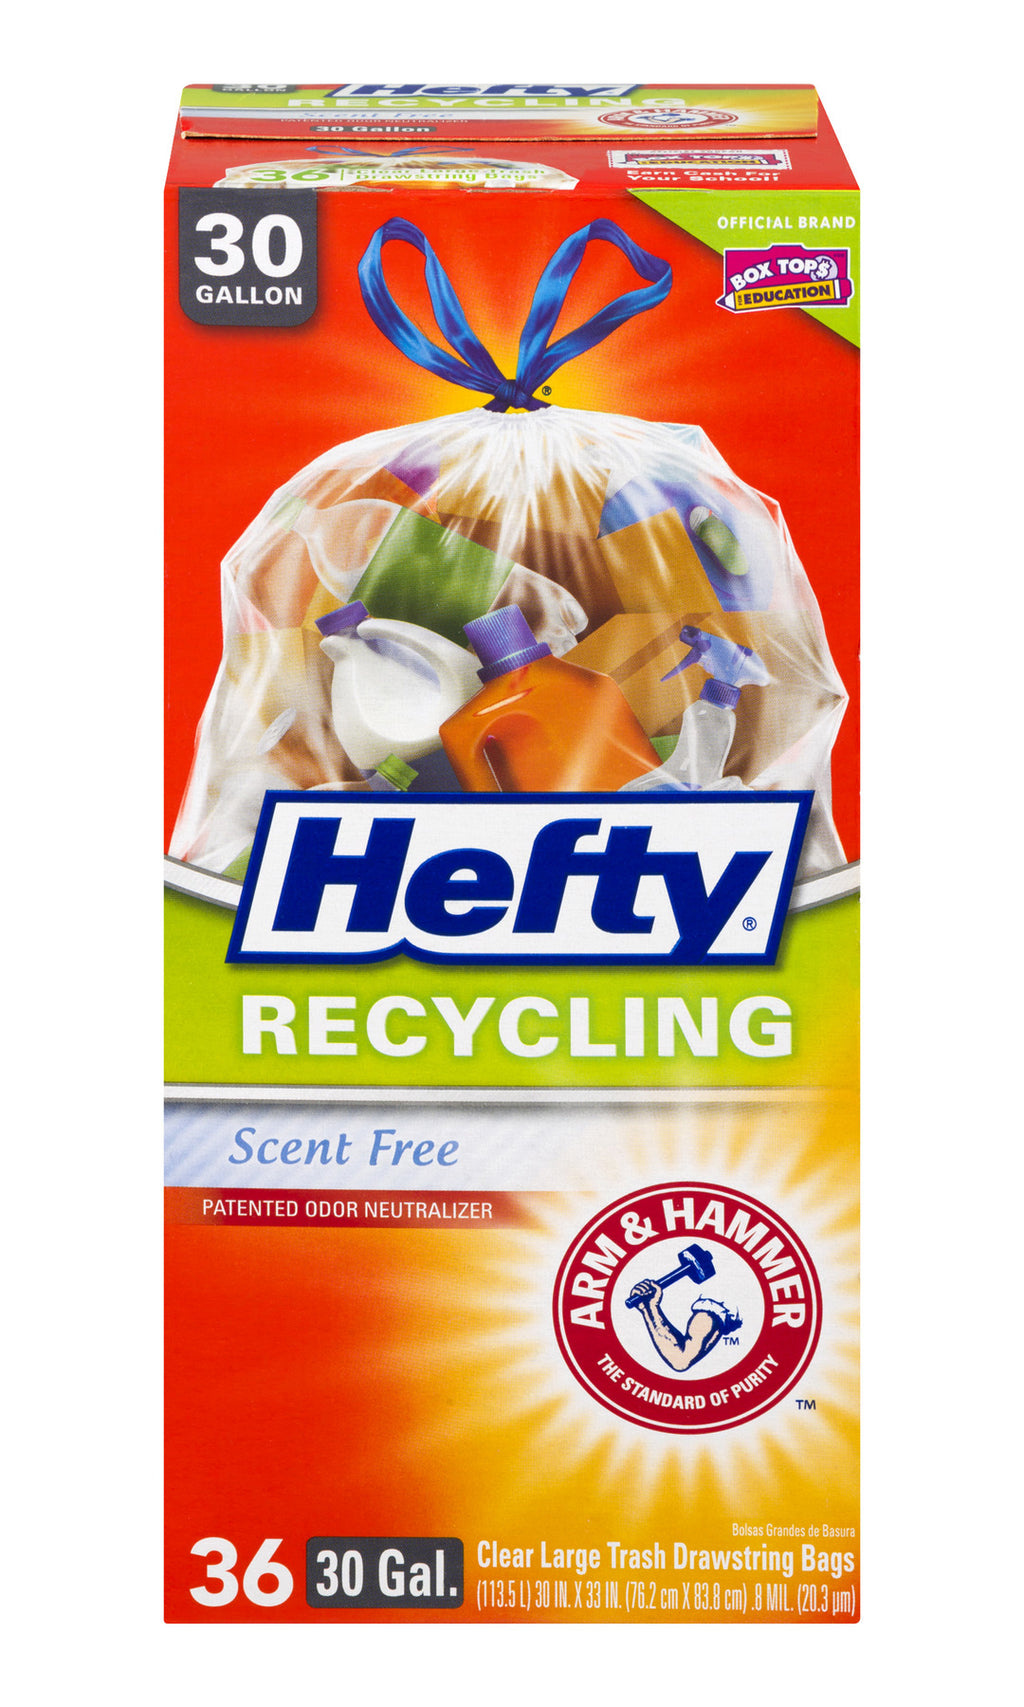 Clear Recycling Bags, 20 count, 13 gallon recycling bags at Whole